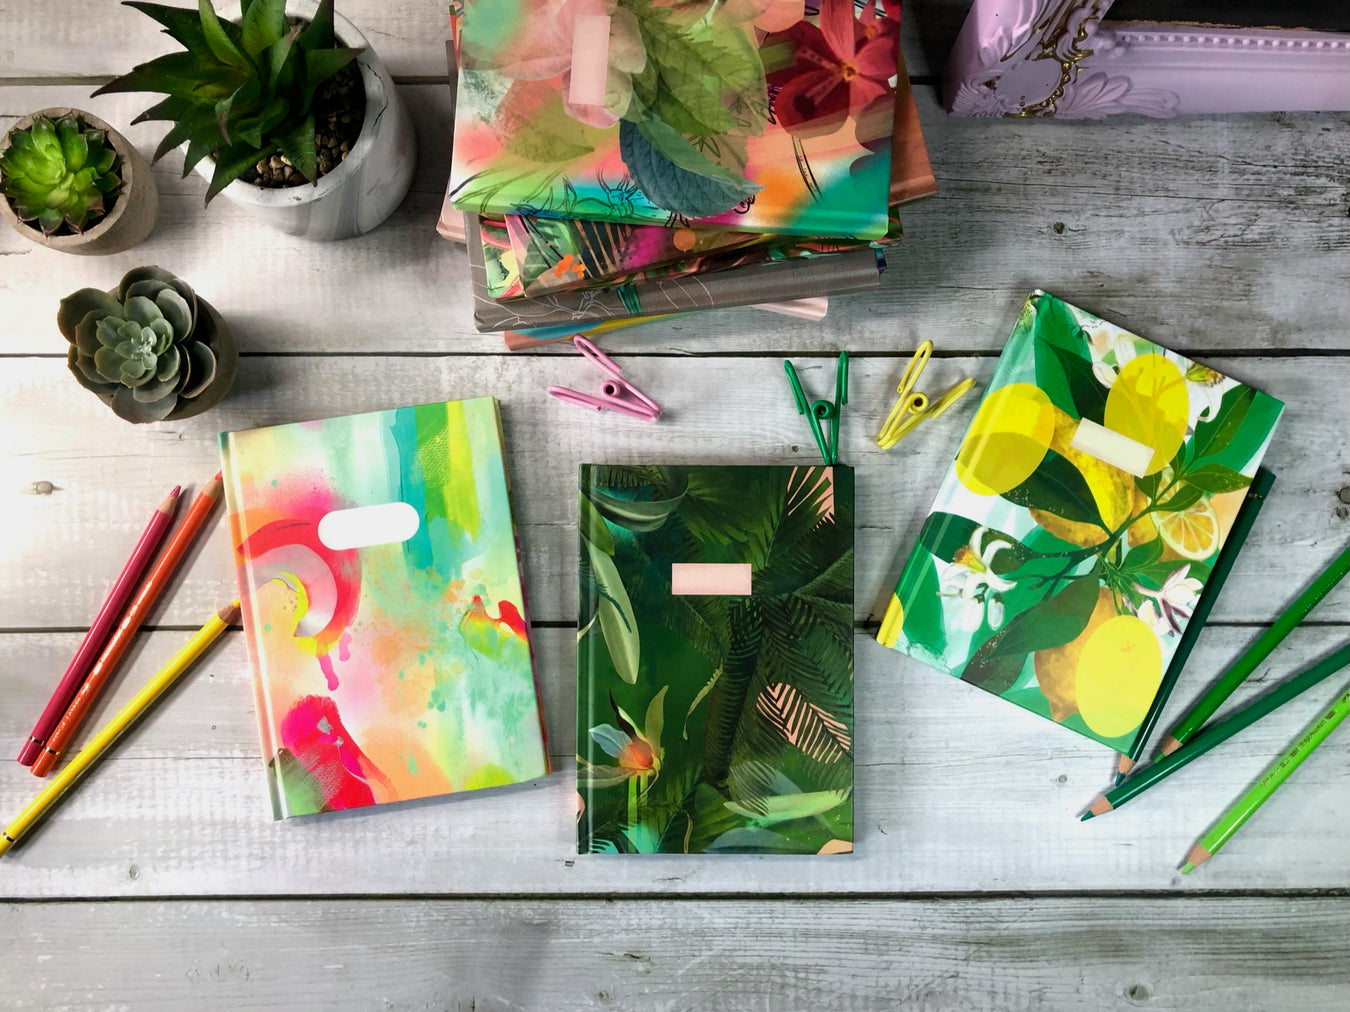 Colorful notebooks with tropical and abstract patterns on a wooden table, surrounded by pencils, pens, and potted plants.